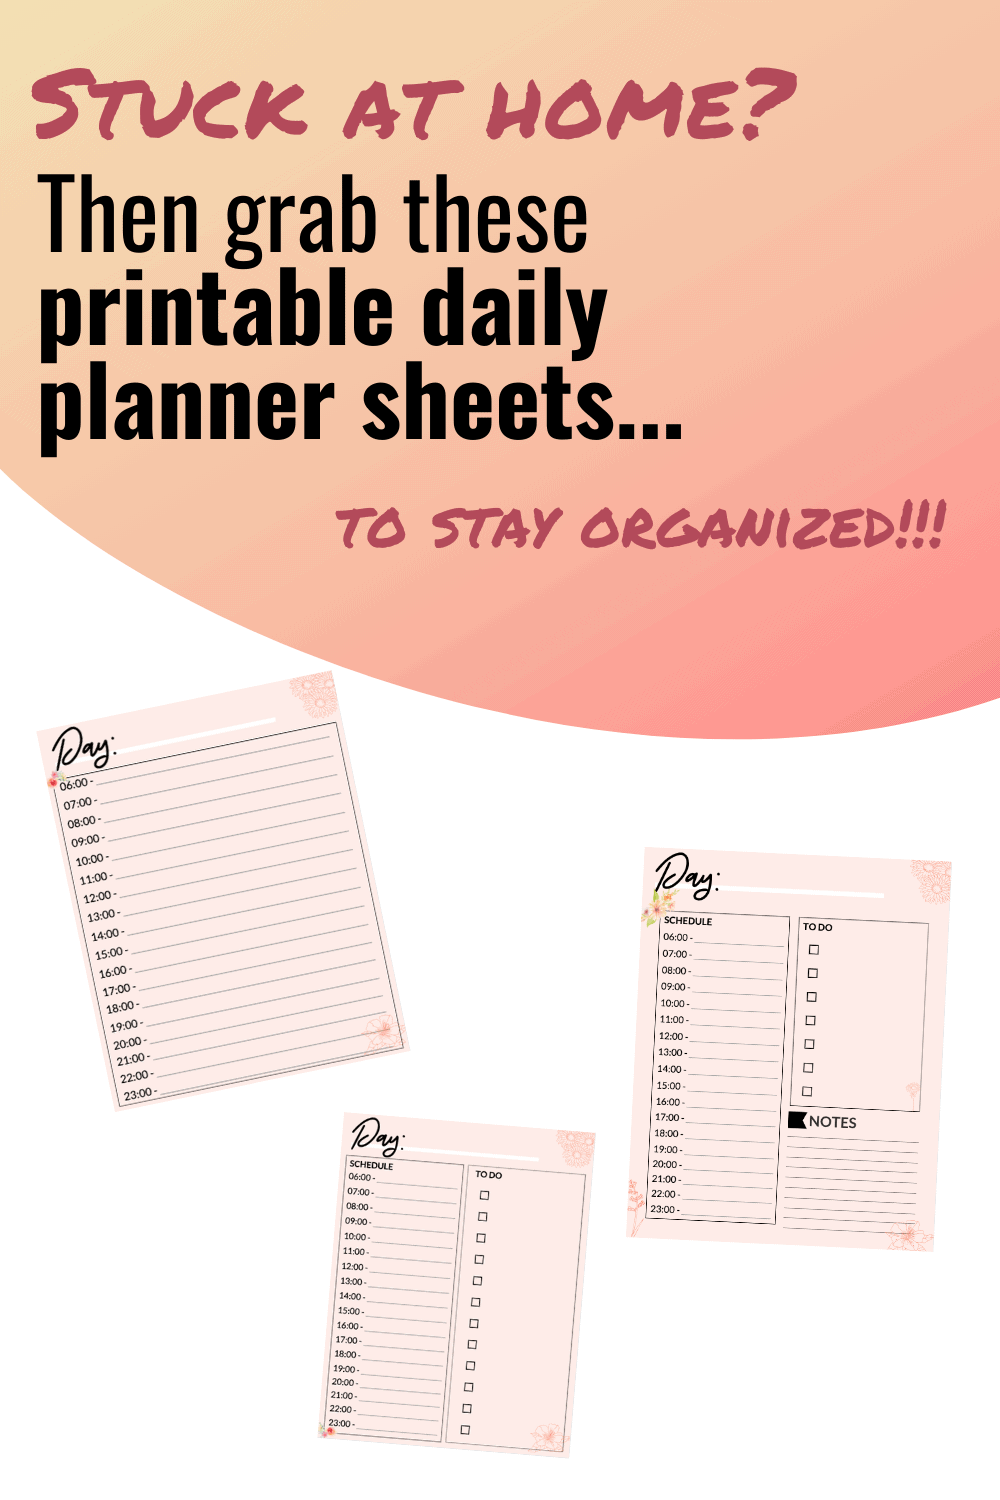 This Free Printable Daily Planner With Time Slots Will Make Life So Much Easier